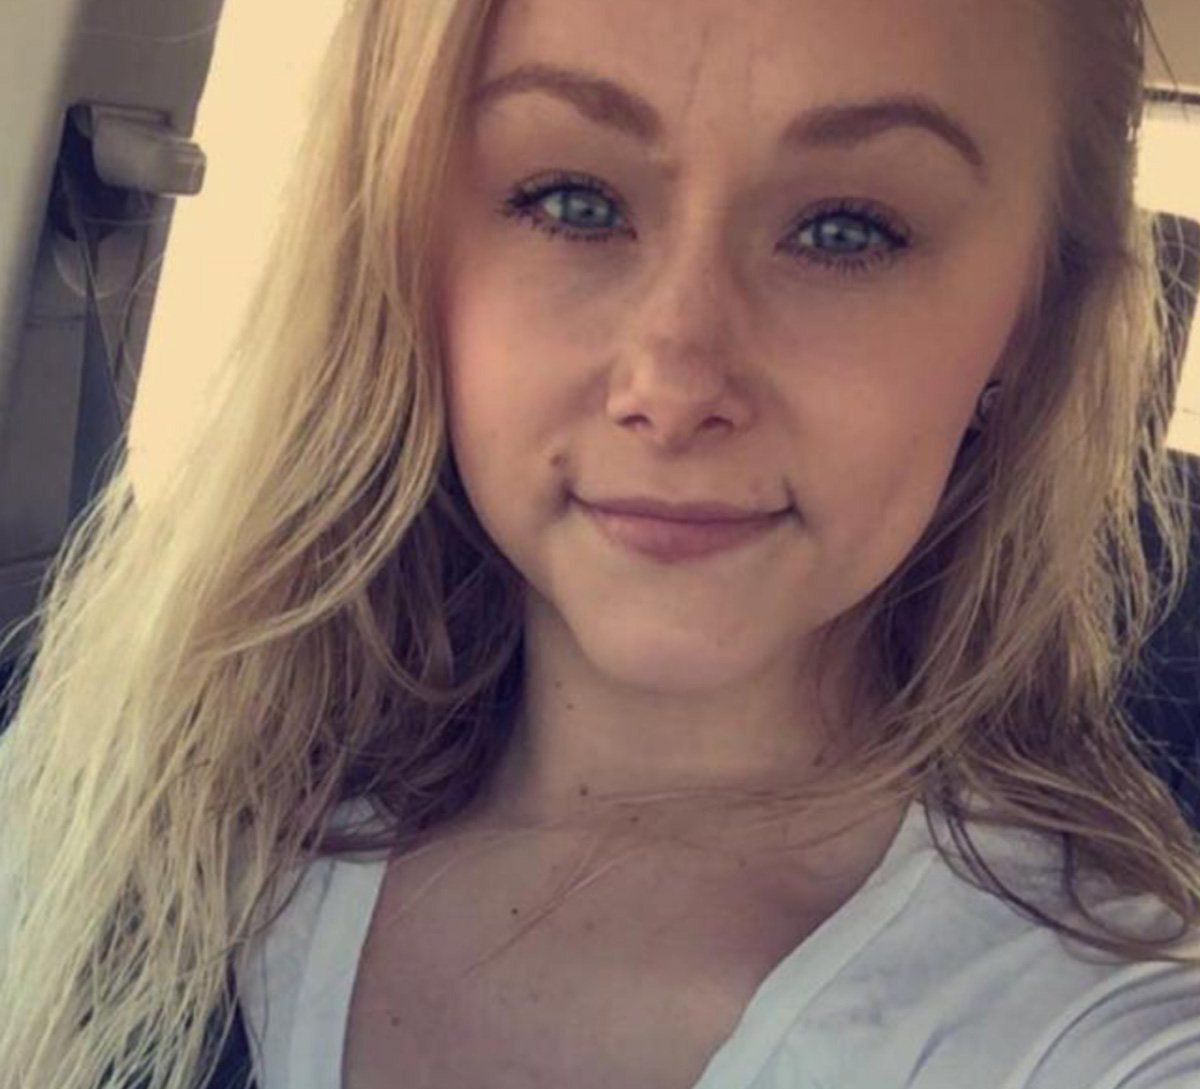 Friend of Sydney Loofe testifies she set up fake dating profile in effort to find Loofe